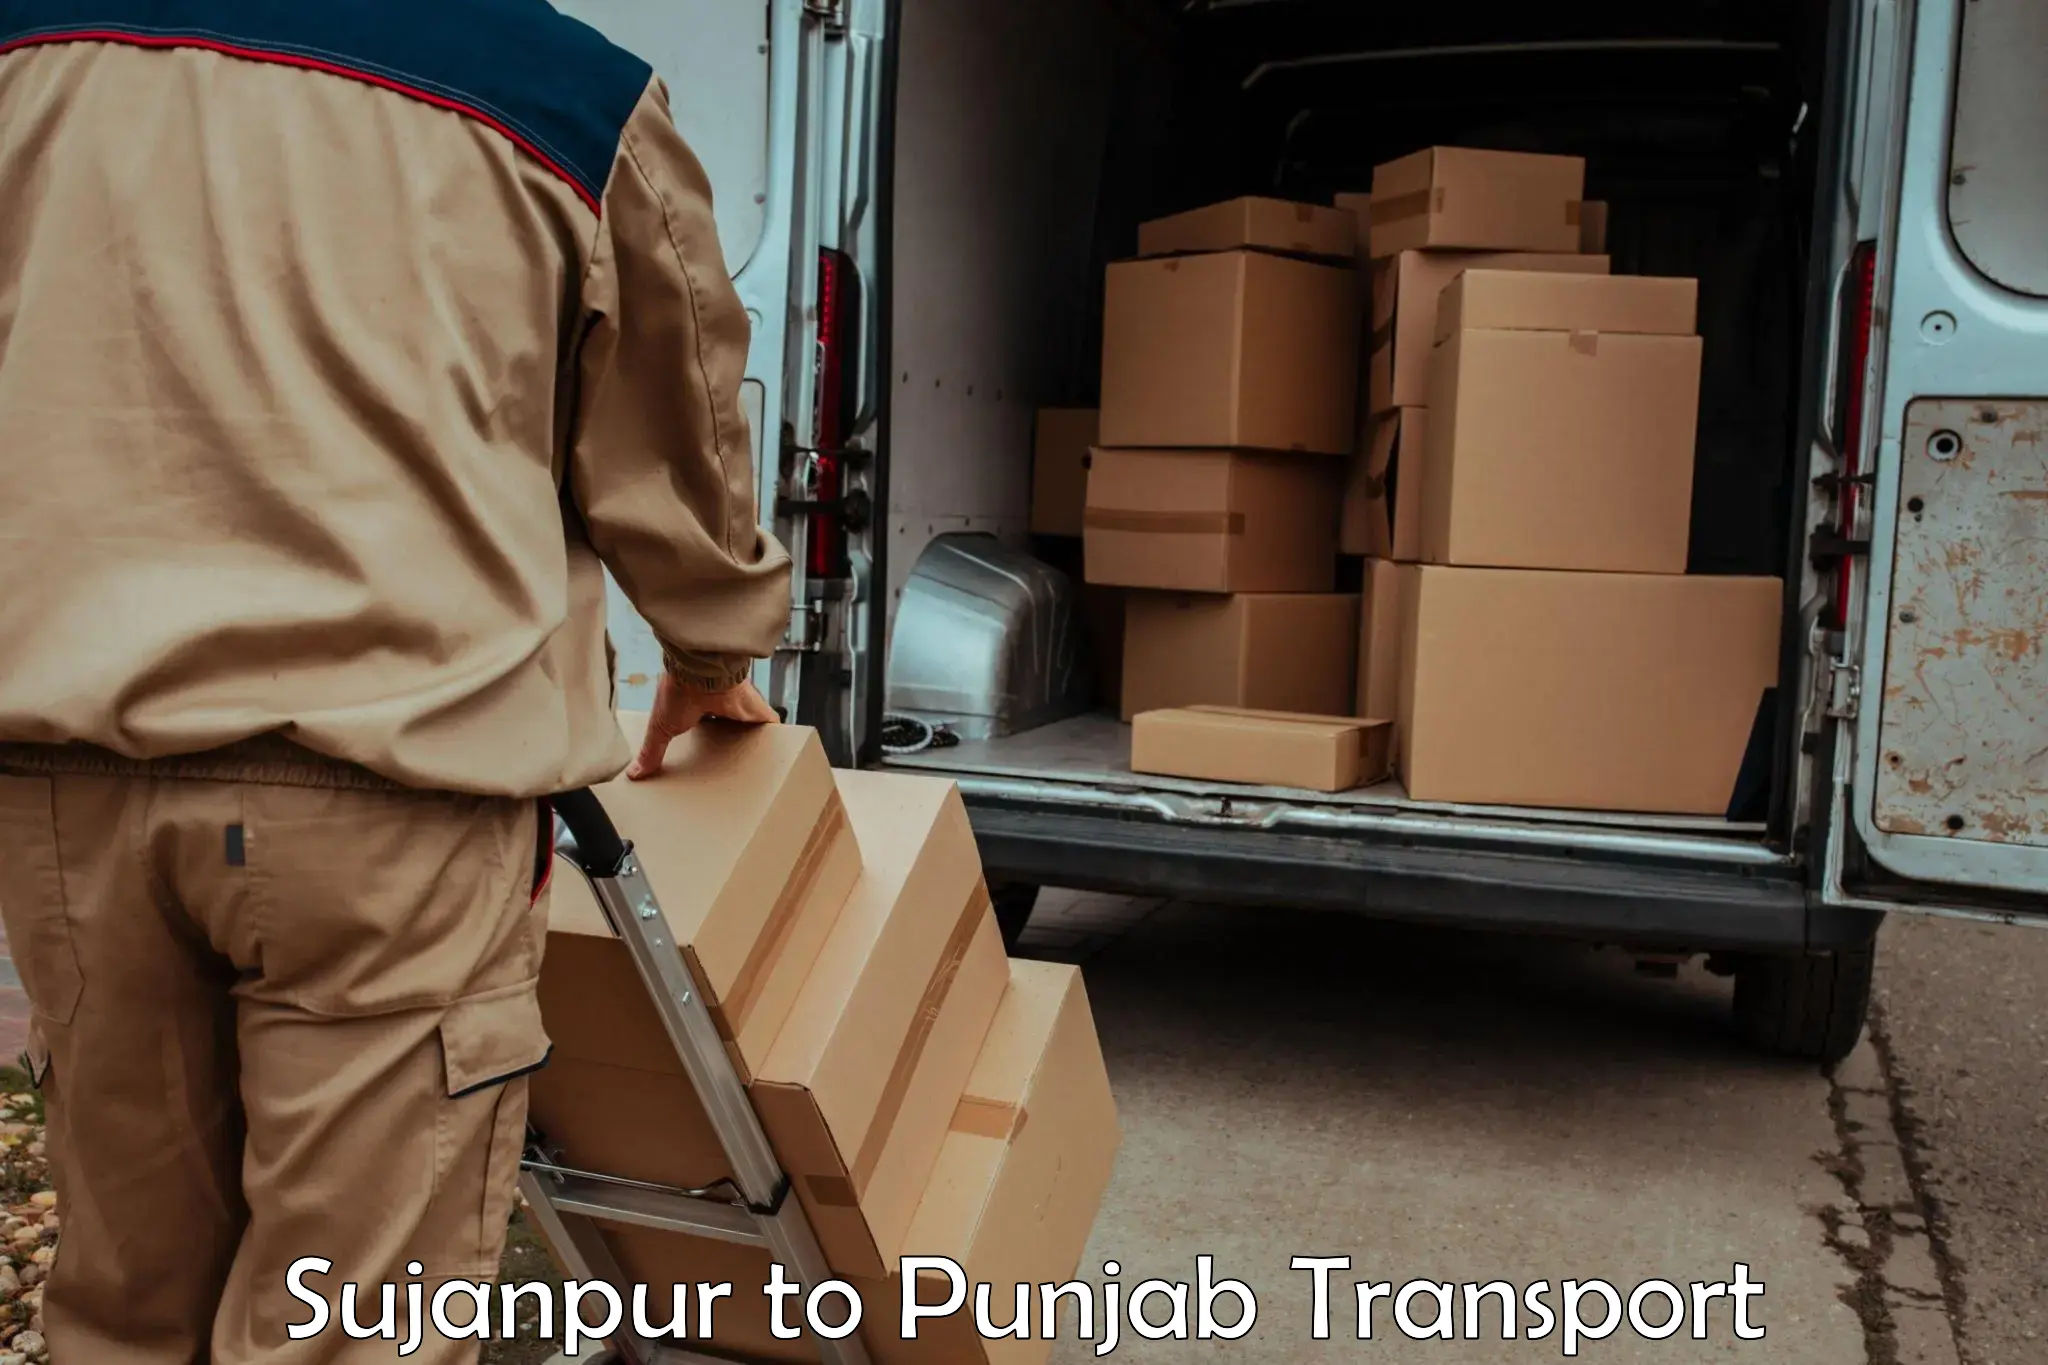 Lorry transport service Sujanpur to Sultanpur Lodhi